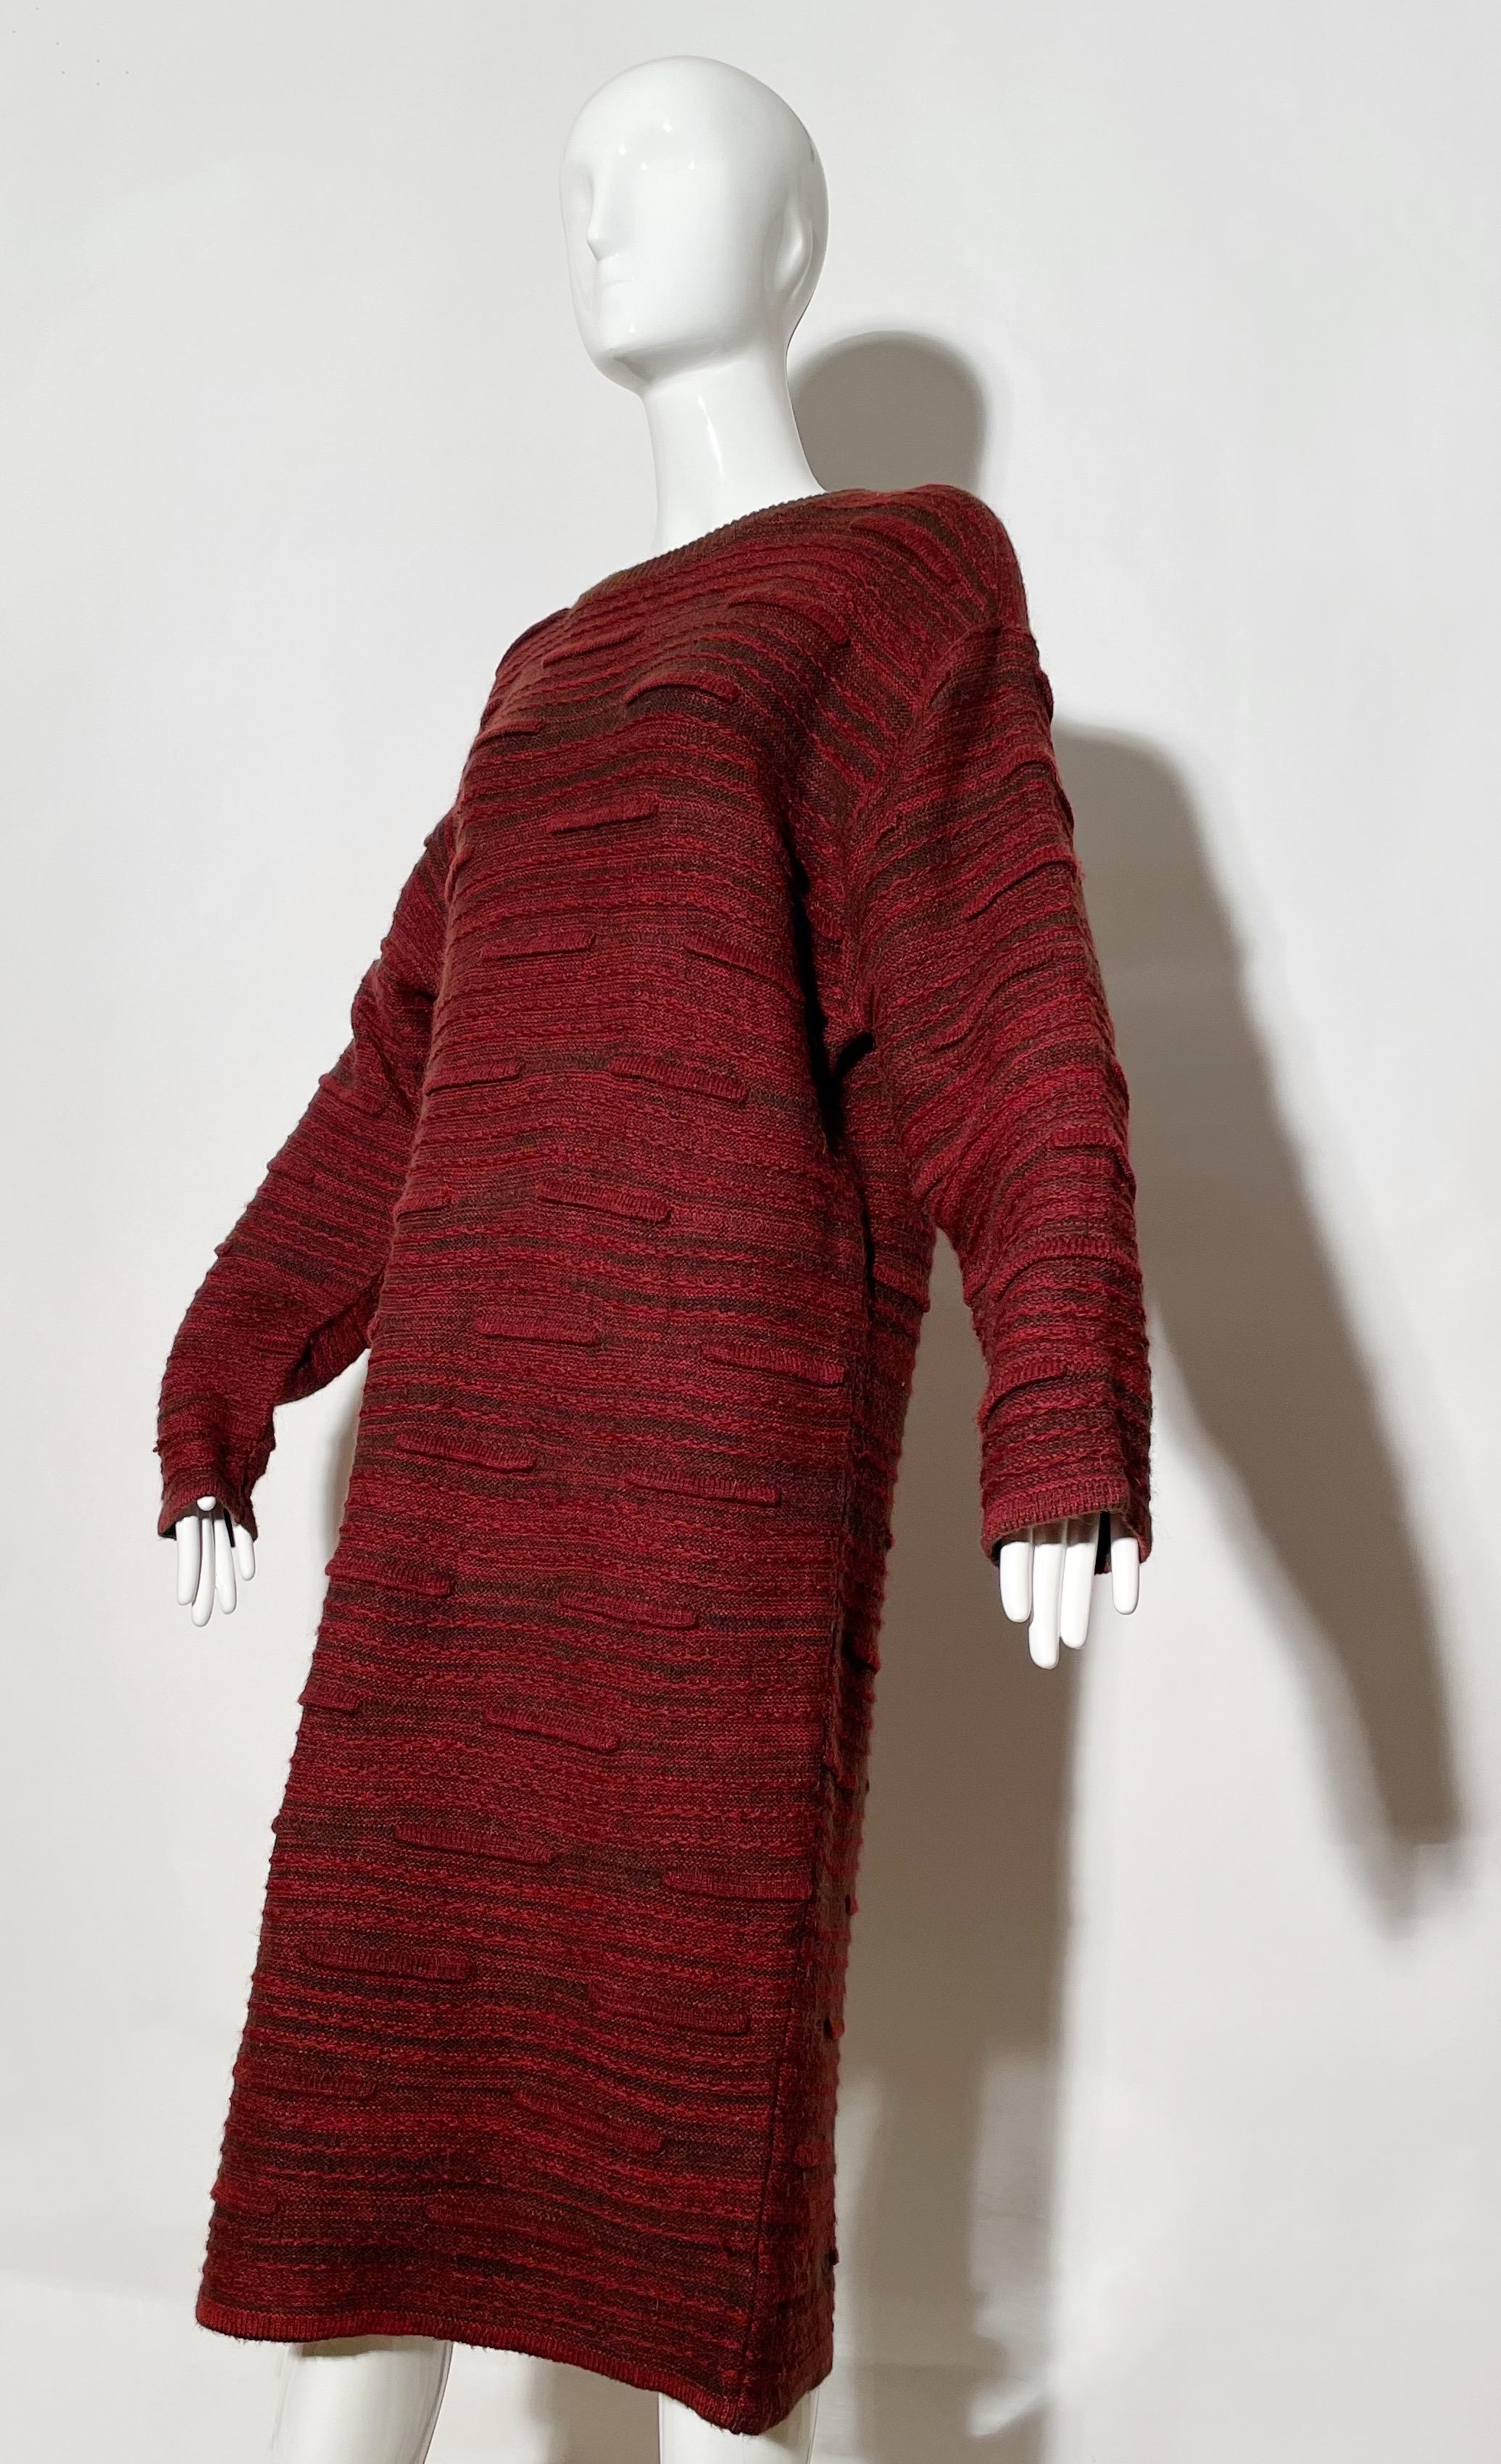 Issey Miyake Knit Sweater Dress  In Good Condition For Sale In Los Angeles, CA